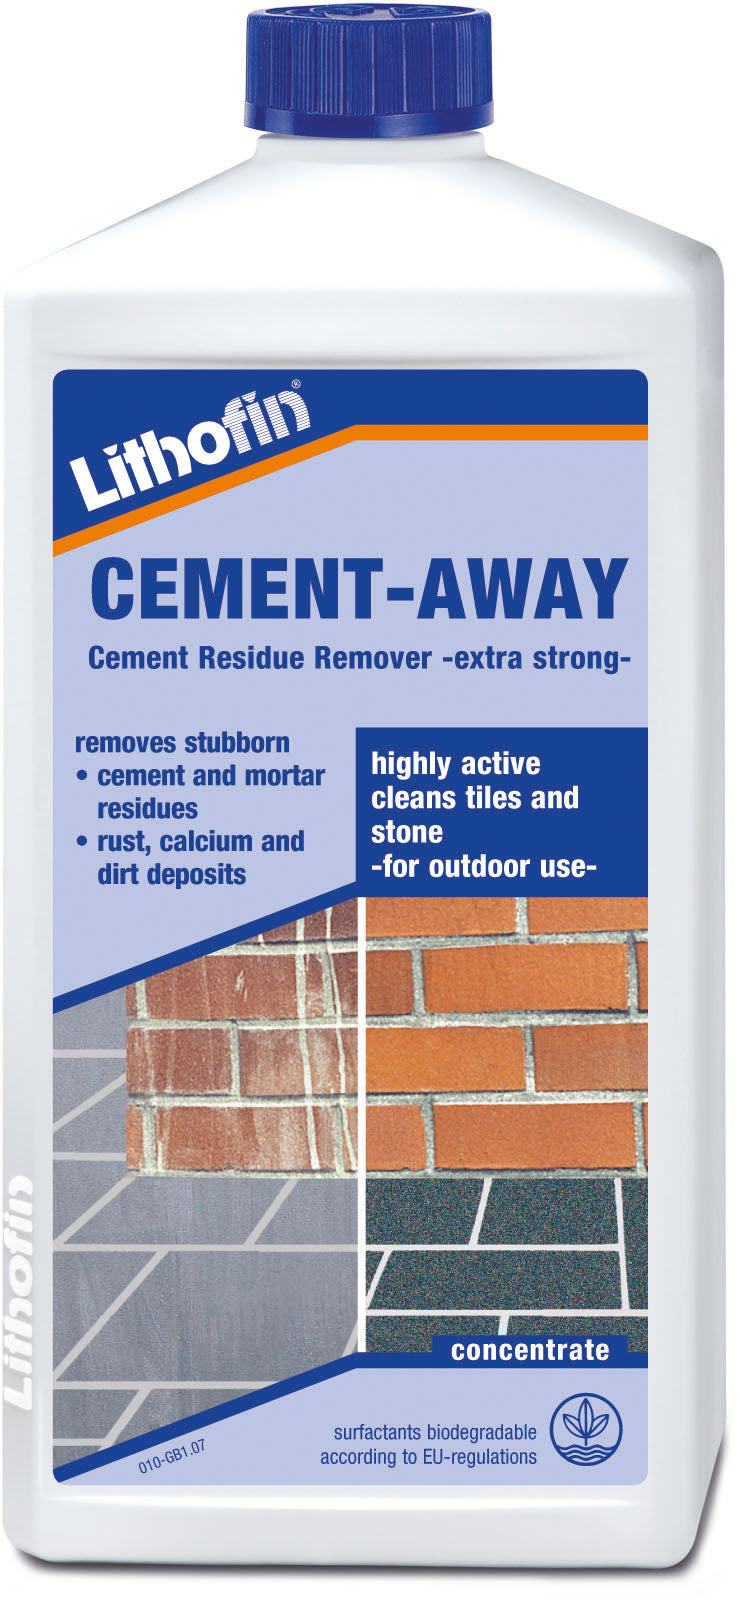 Lithofin cement-away - cement residue remover 